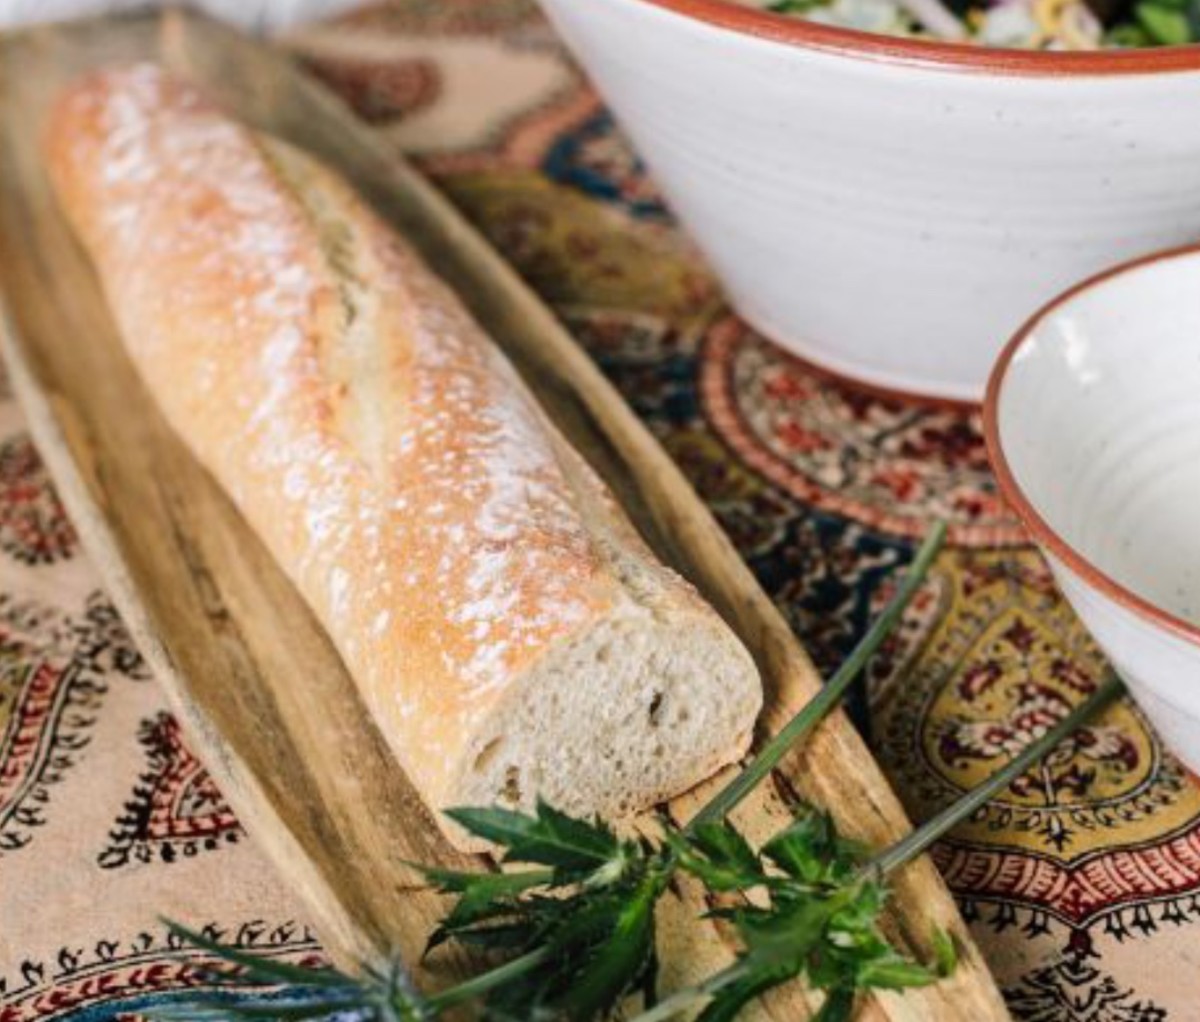 Ten Thousand Villages’ French Bread Board